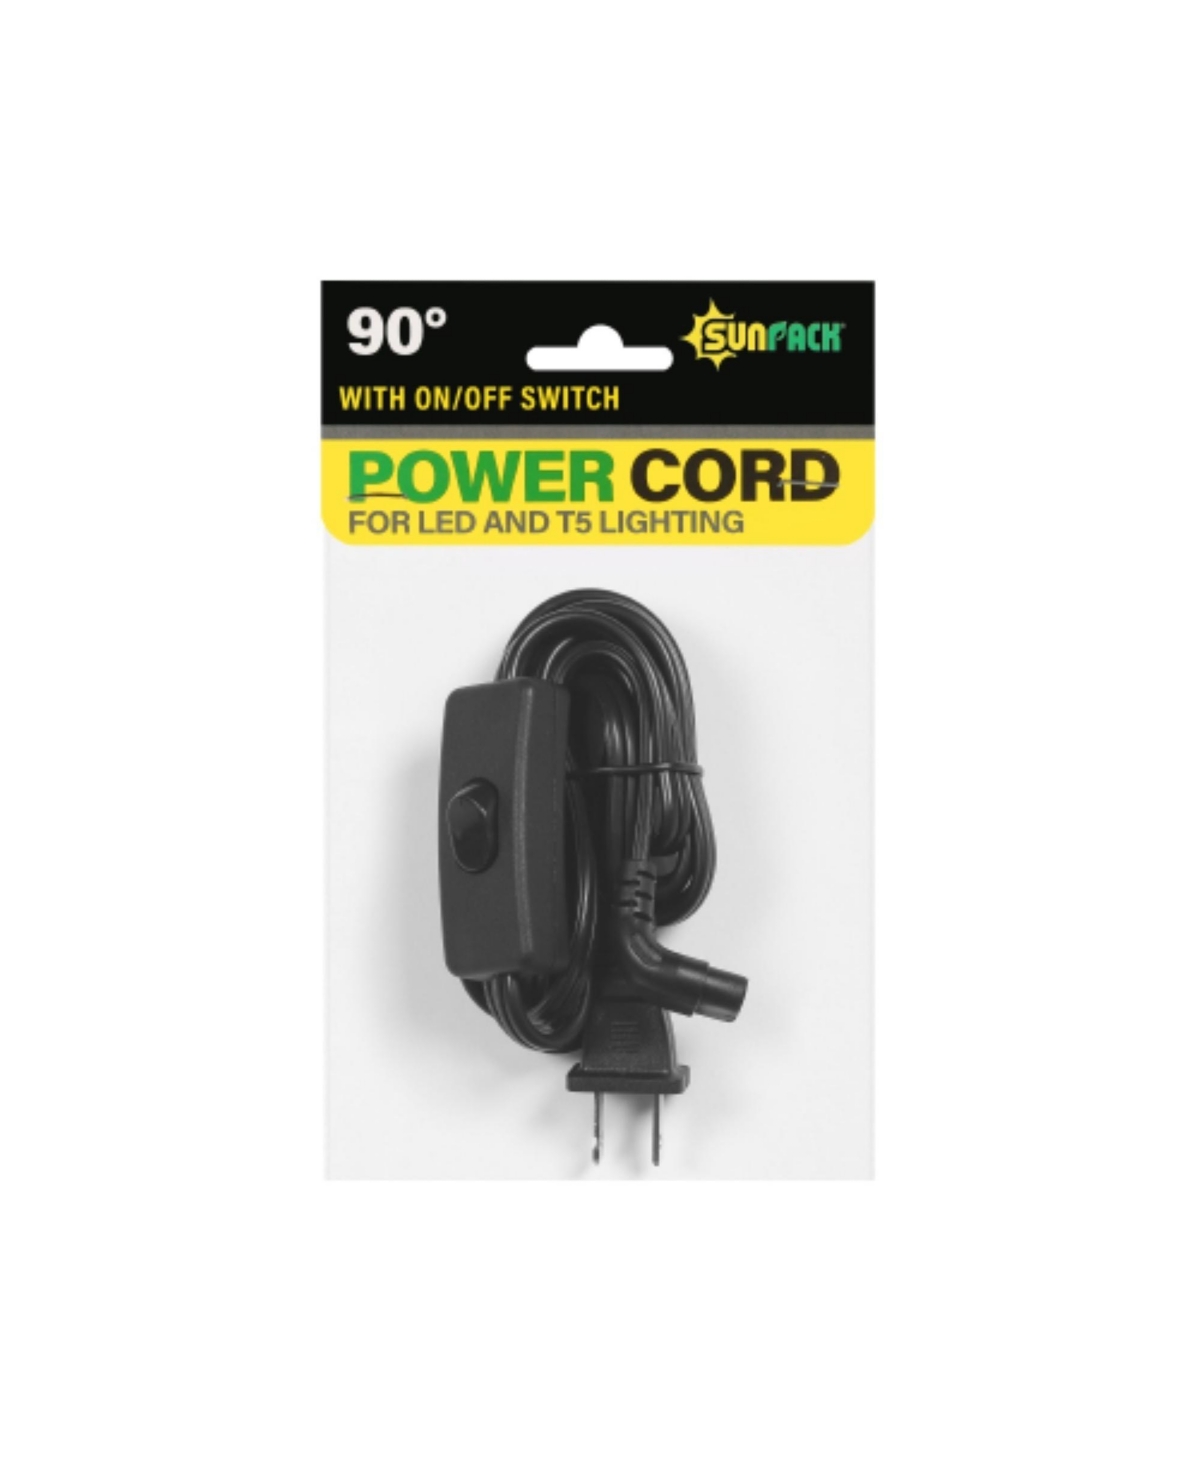 90 Degree Power Cord with On Off Switch for Led and T5 Lighting - Black